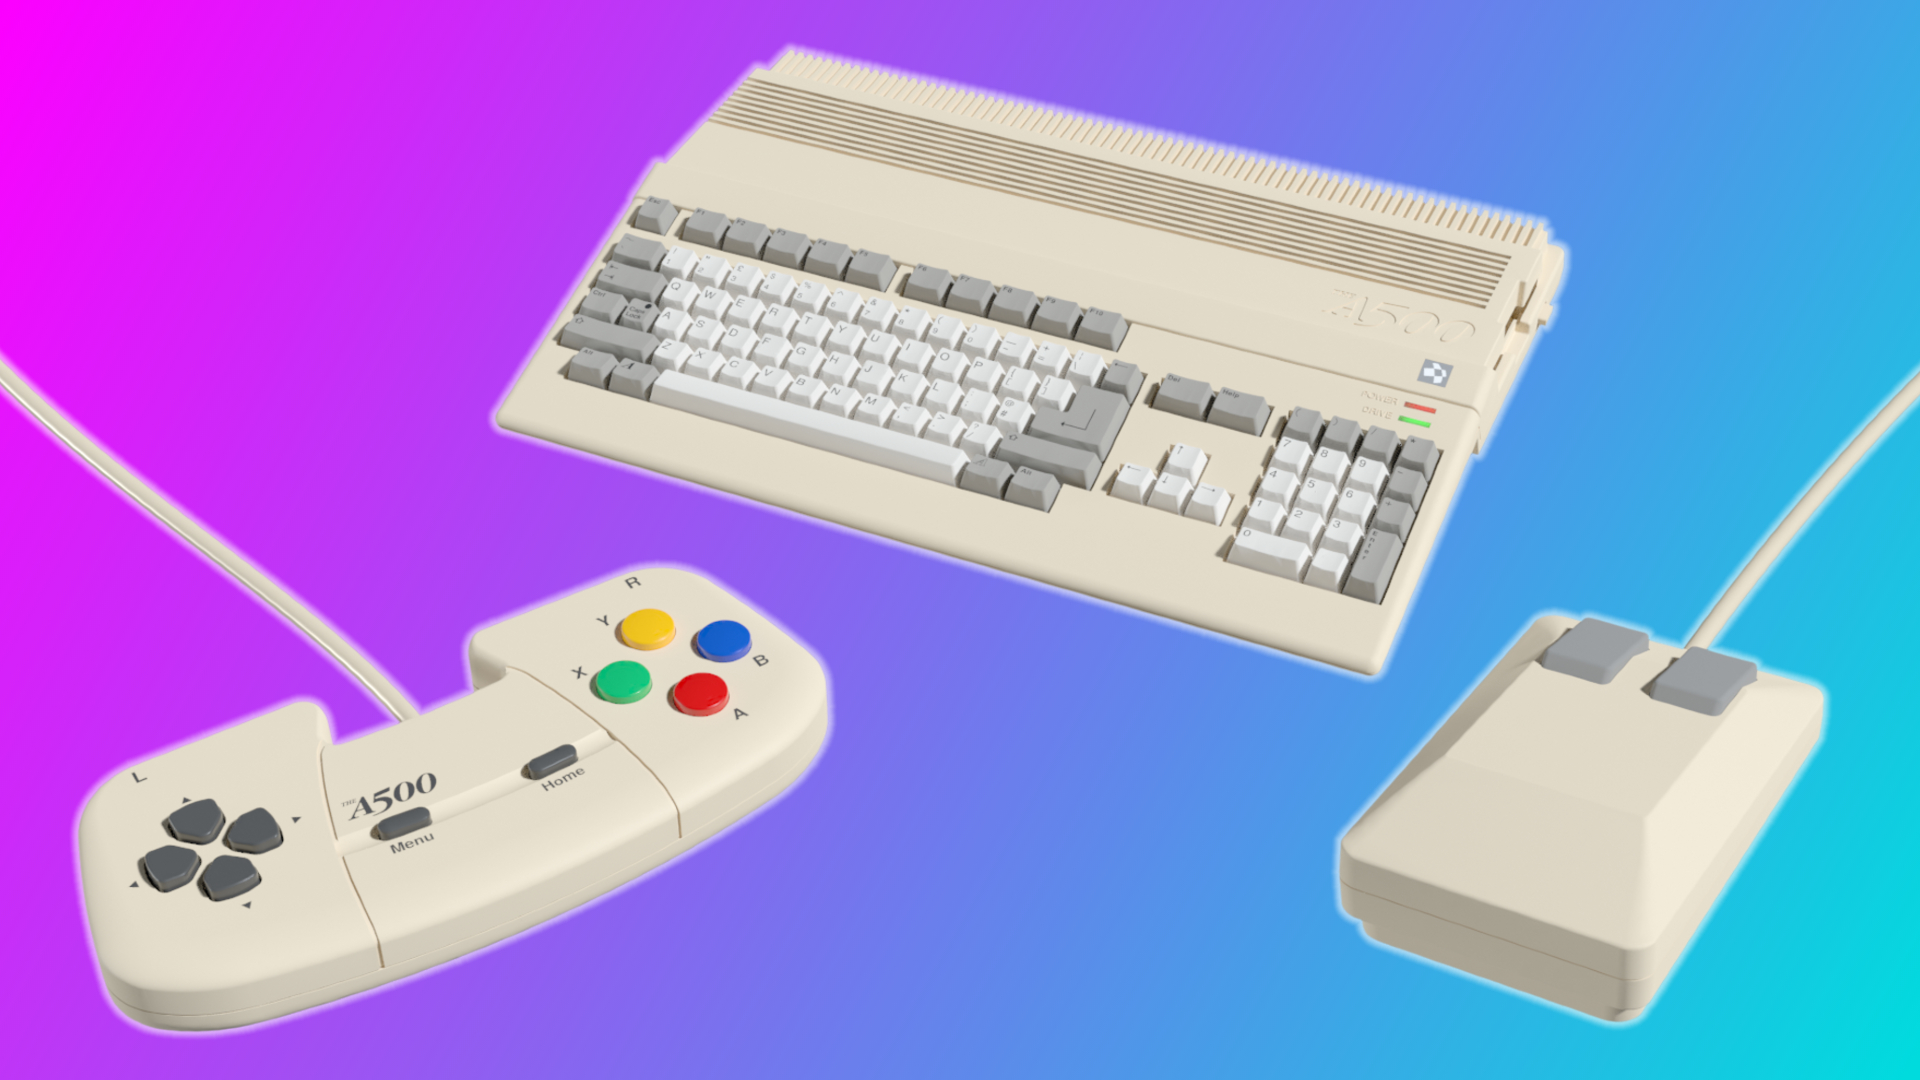 The Amiga 500 is getting a miniature console makeover